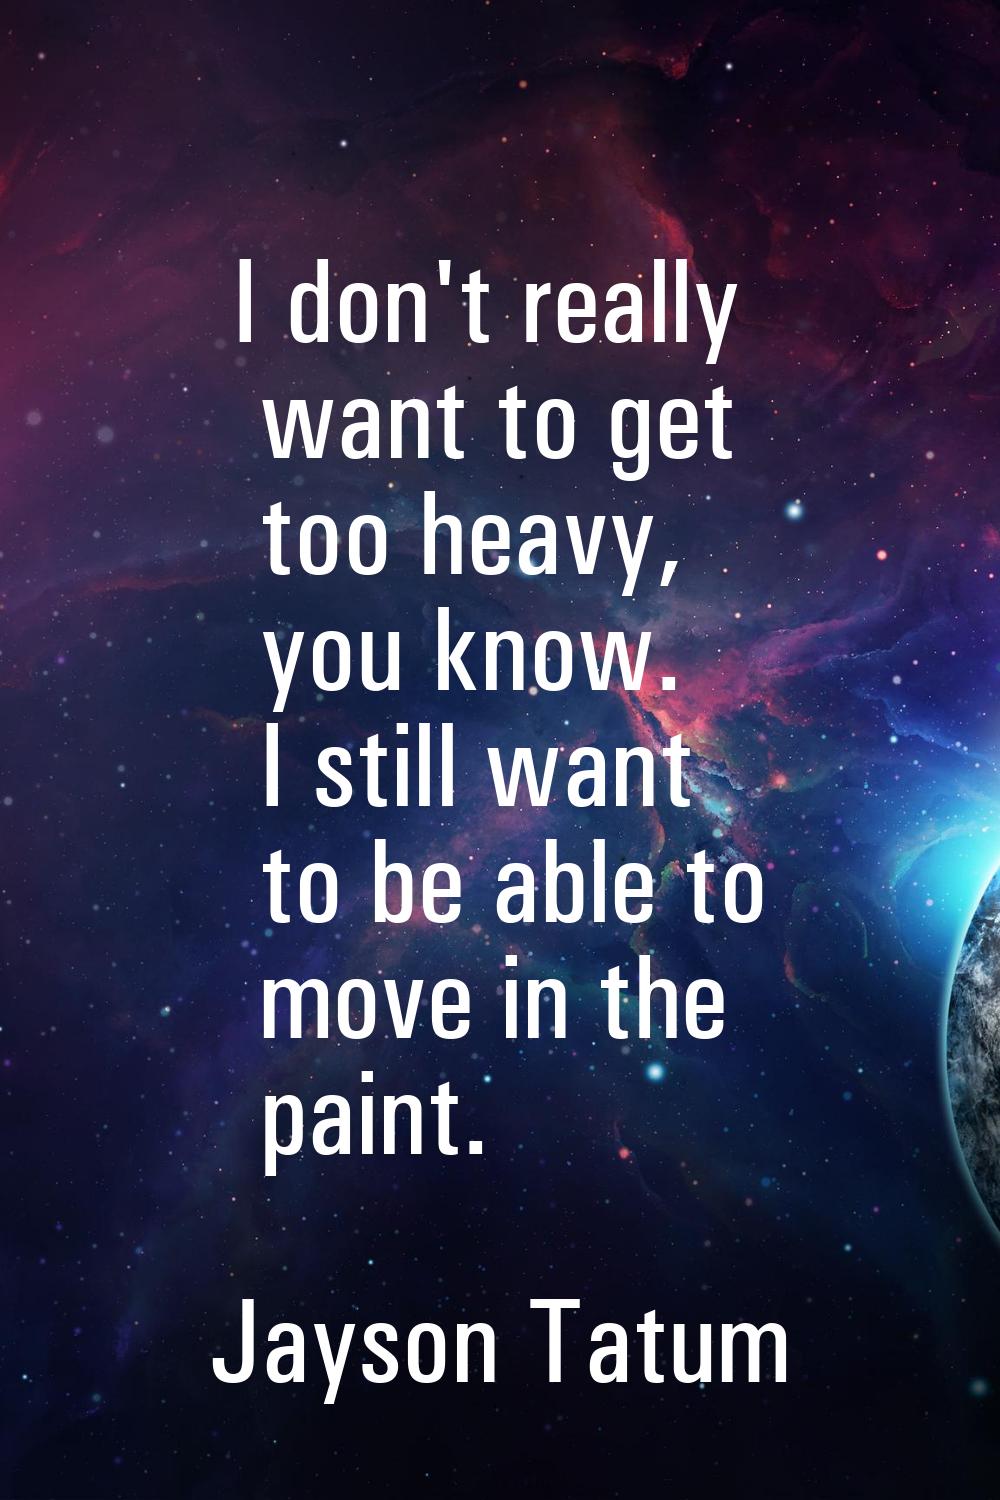 I don't really want to get too heavy, you know. I still want to be able to move in the paint.